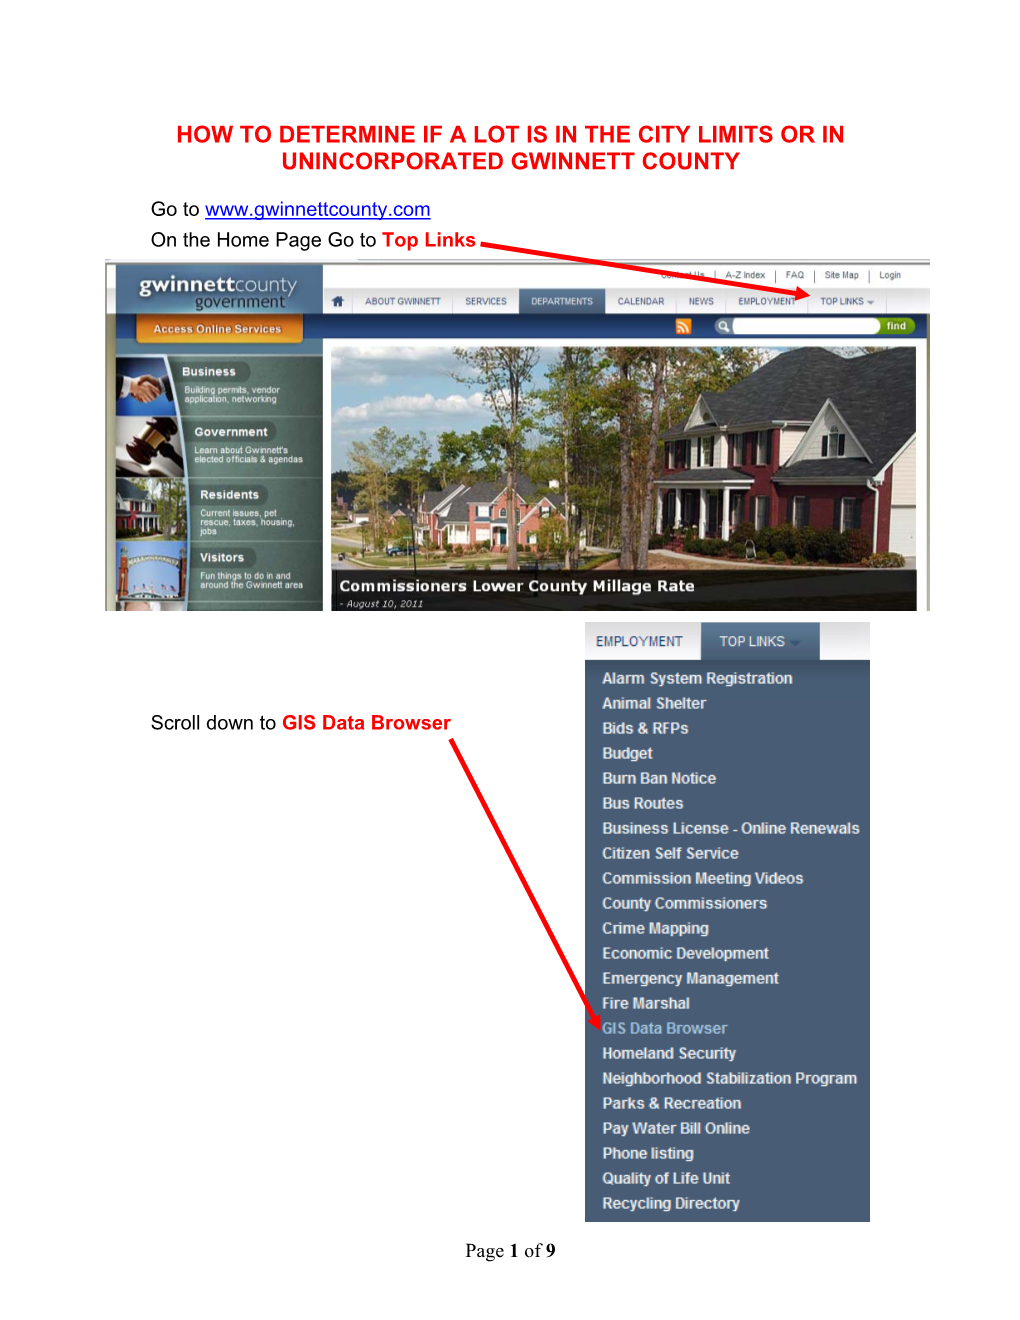 How to Determine If a Lot Is in the City Limits Or in Unincorporated Gwinnett County